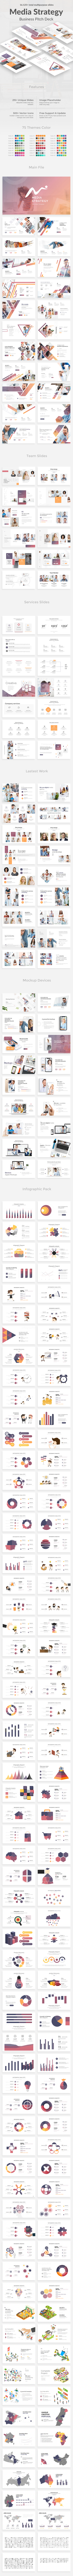 Media Strategy Pitch Deck Powerpoint Template